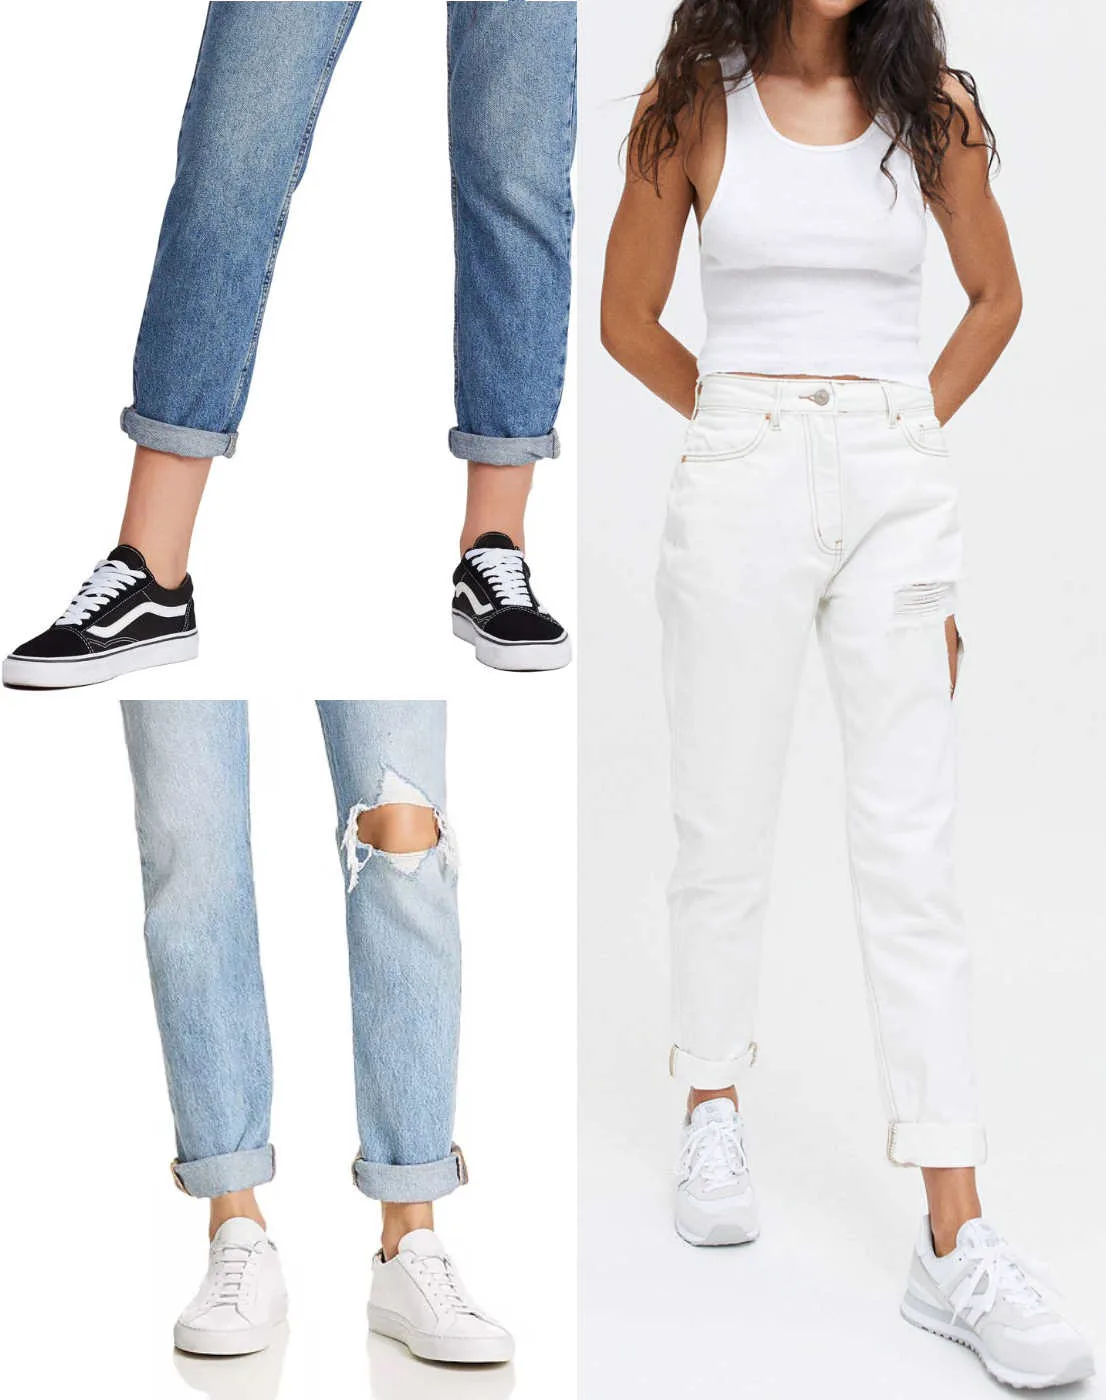 Shoes to Wear with Mom Jeans Outfits